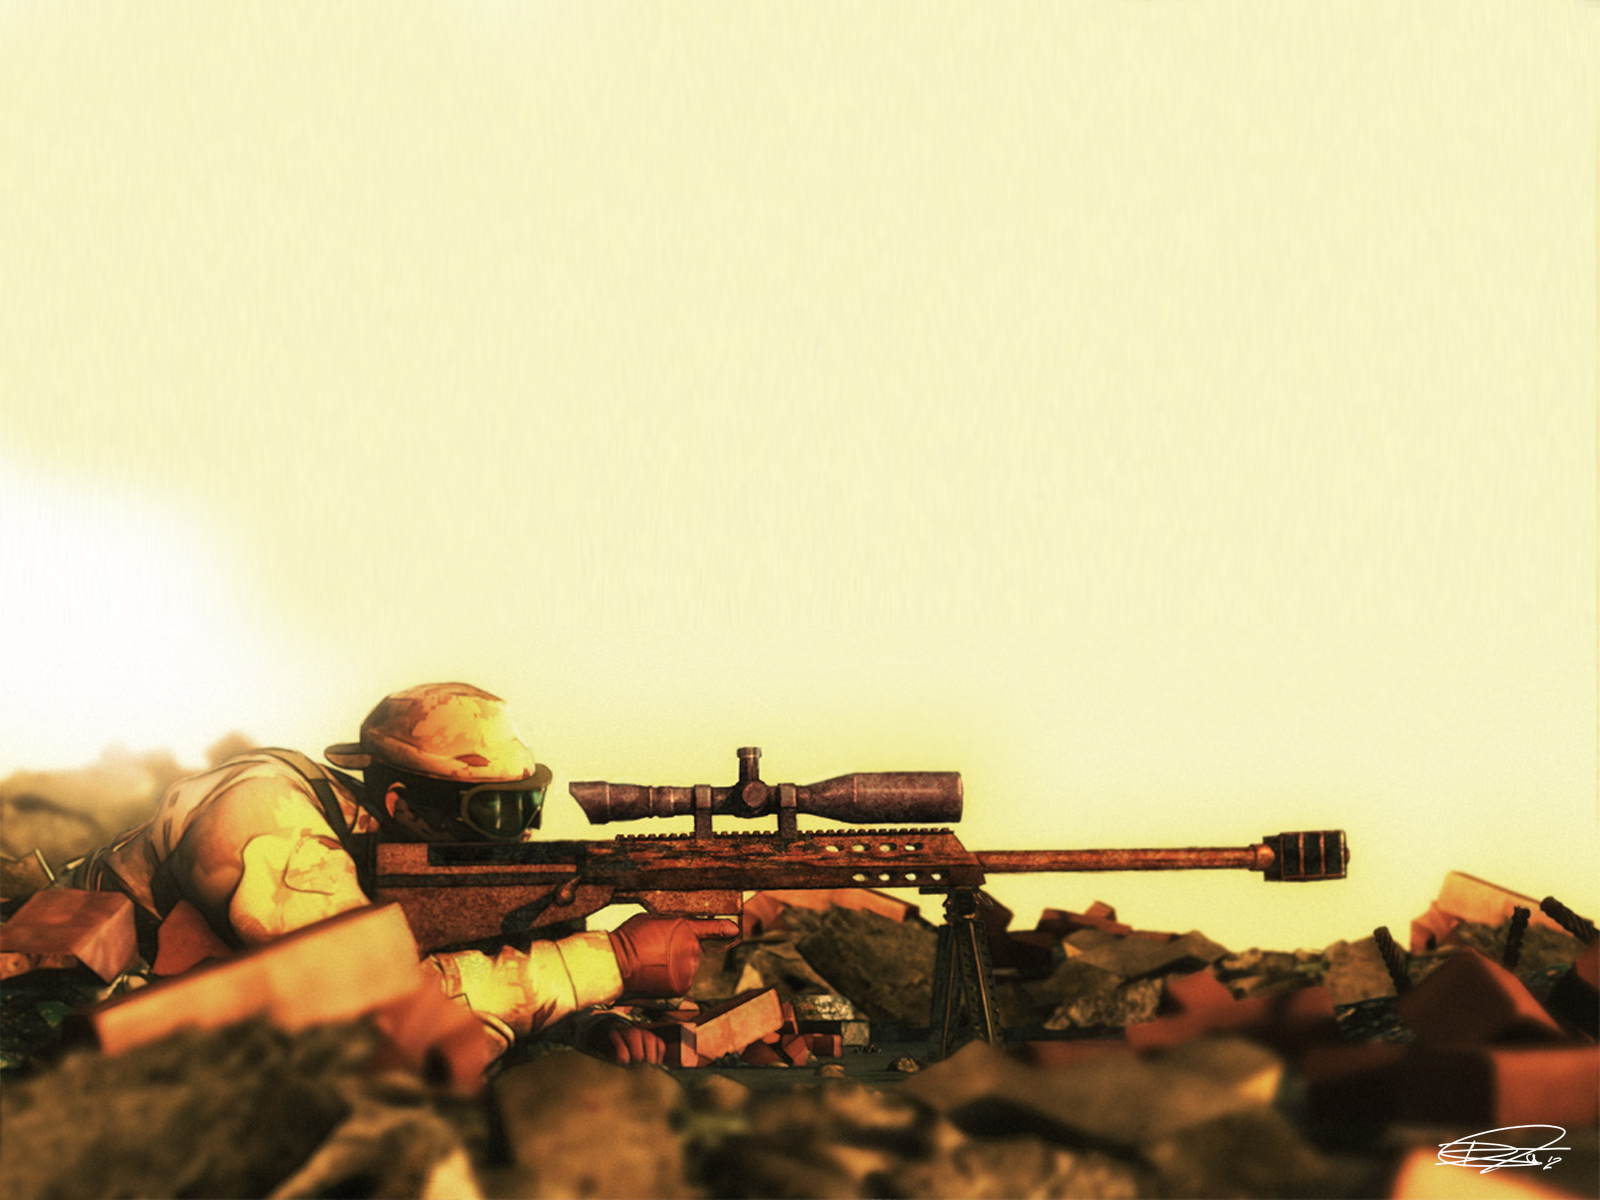 Snipers HD Wallpapers For Mobile - Wallpaper Cave